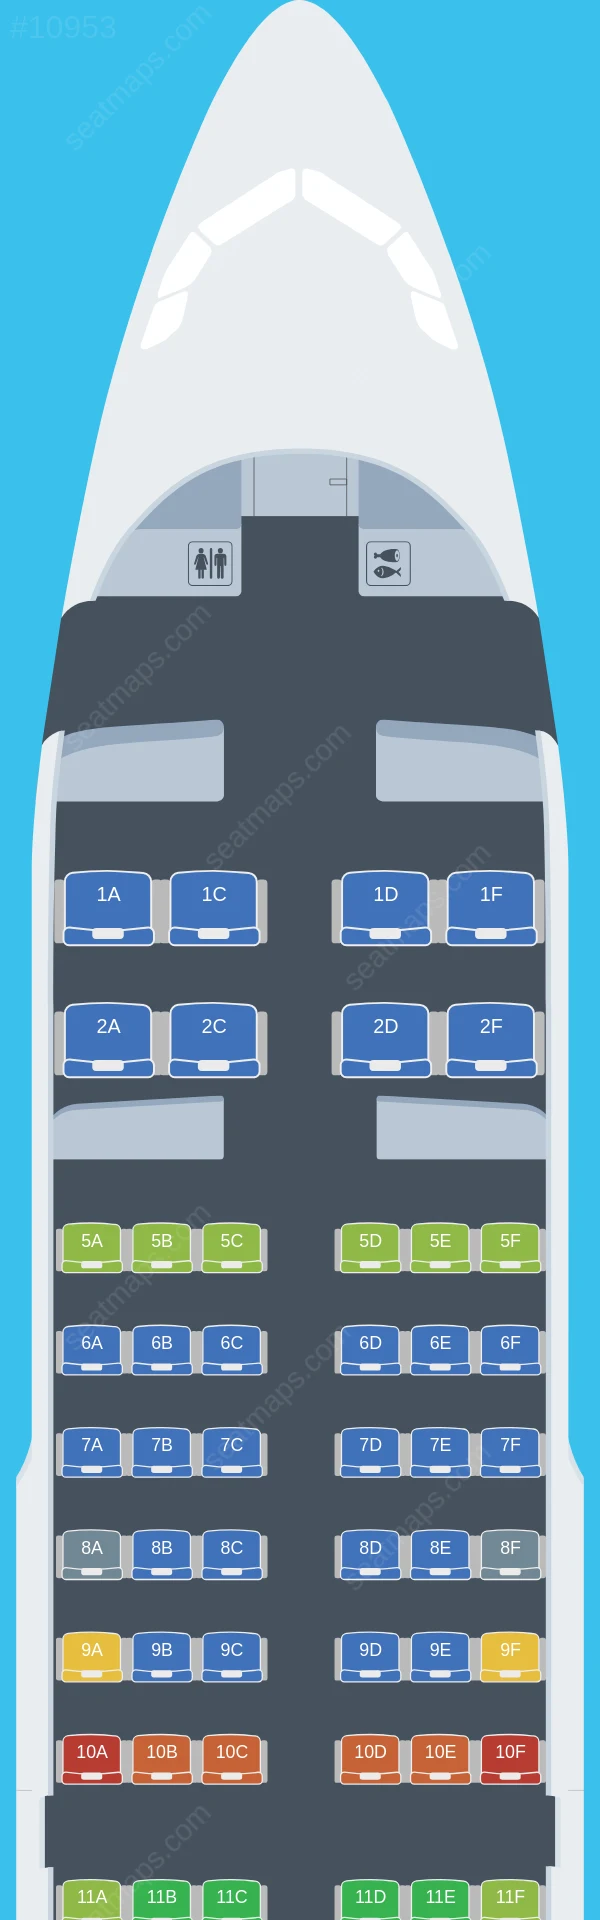 Himalaya Airlines Airbus A319-100 seatmap preview